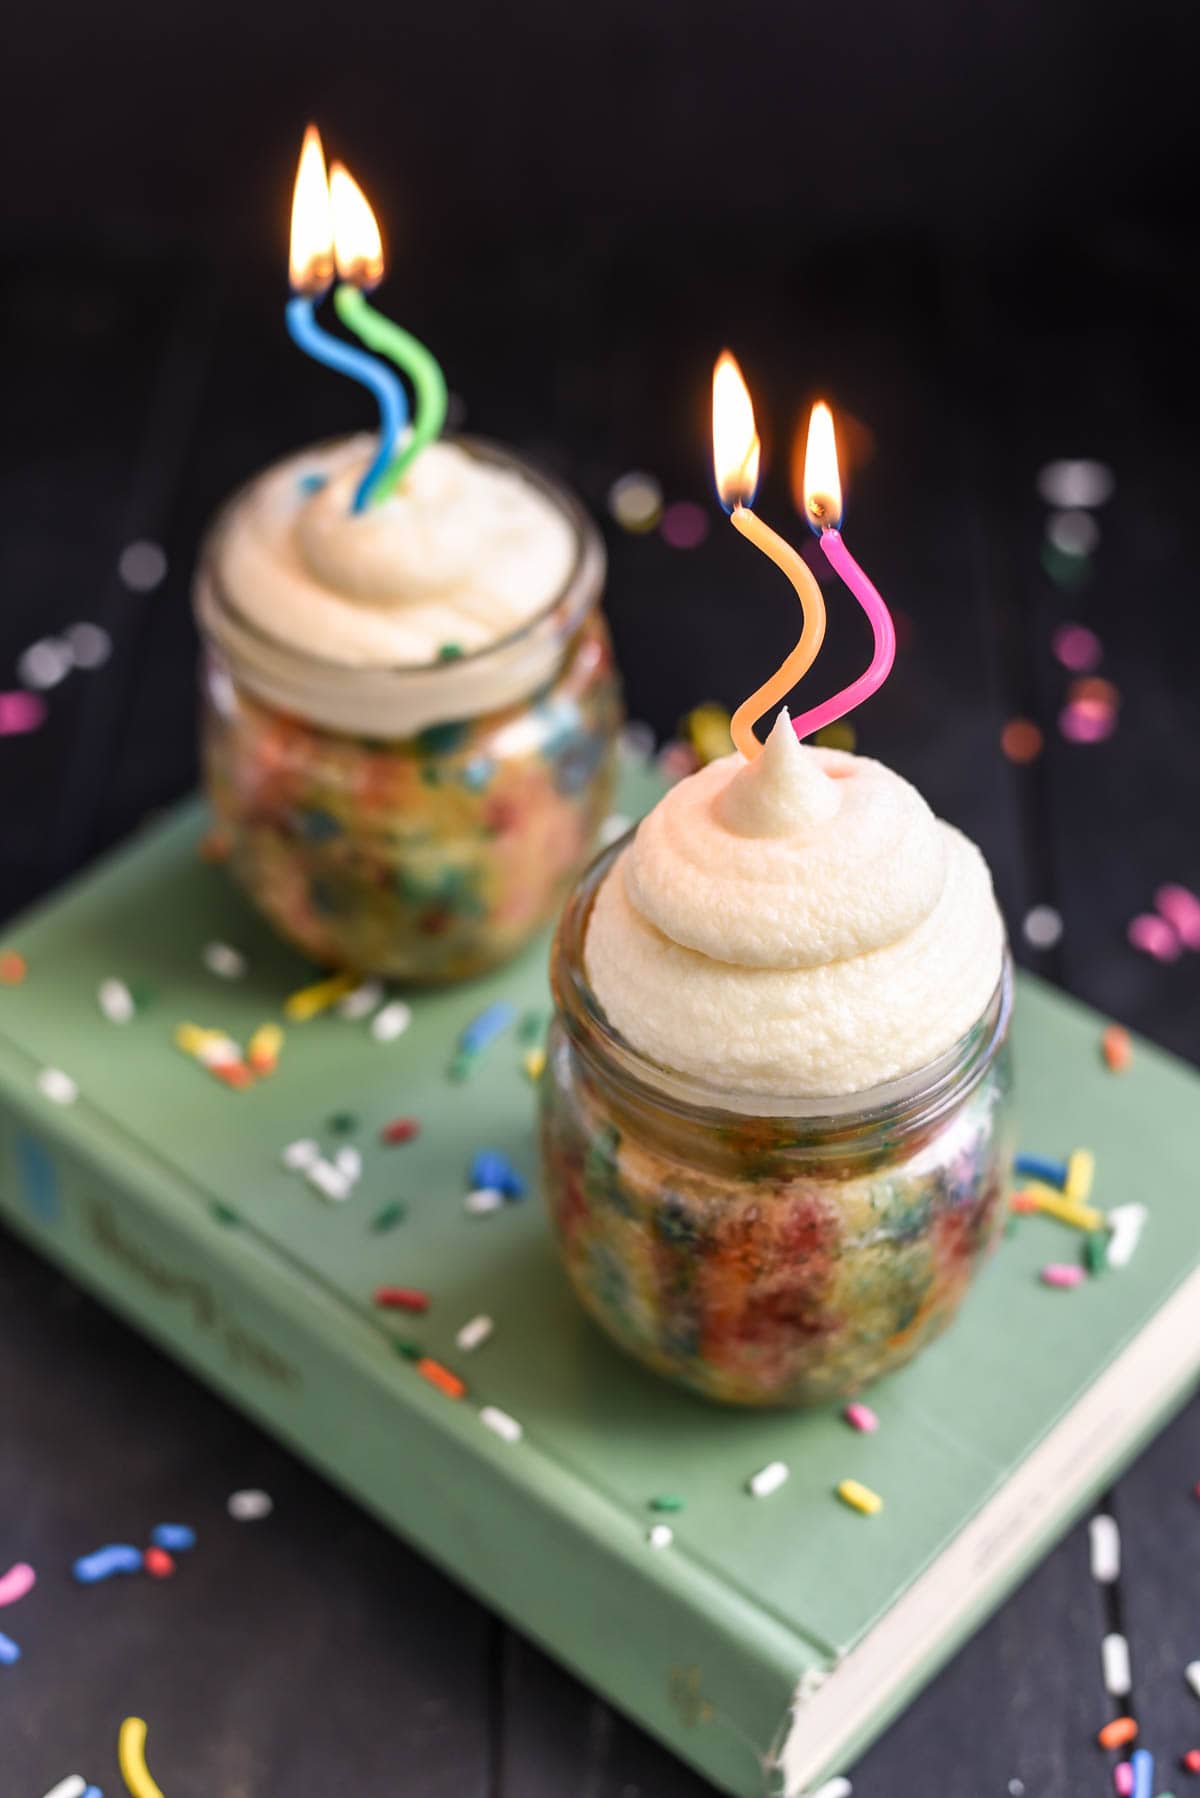 Save this Funfetti Cake in a jar for your next party for two!